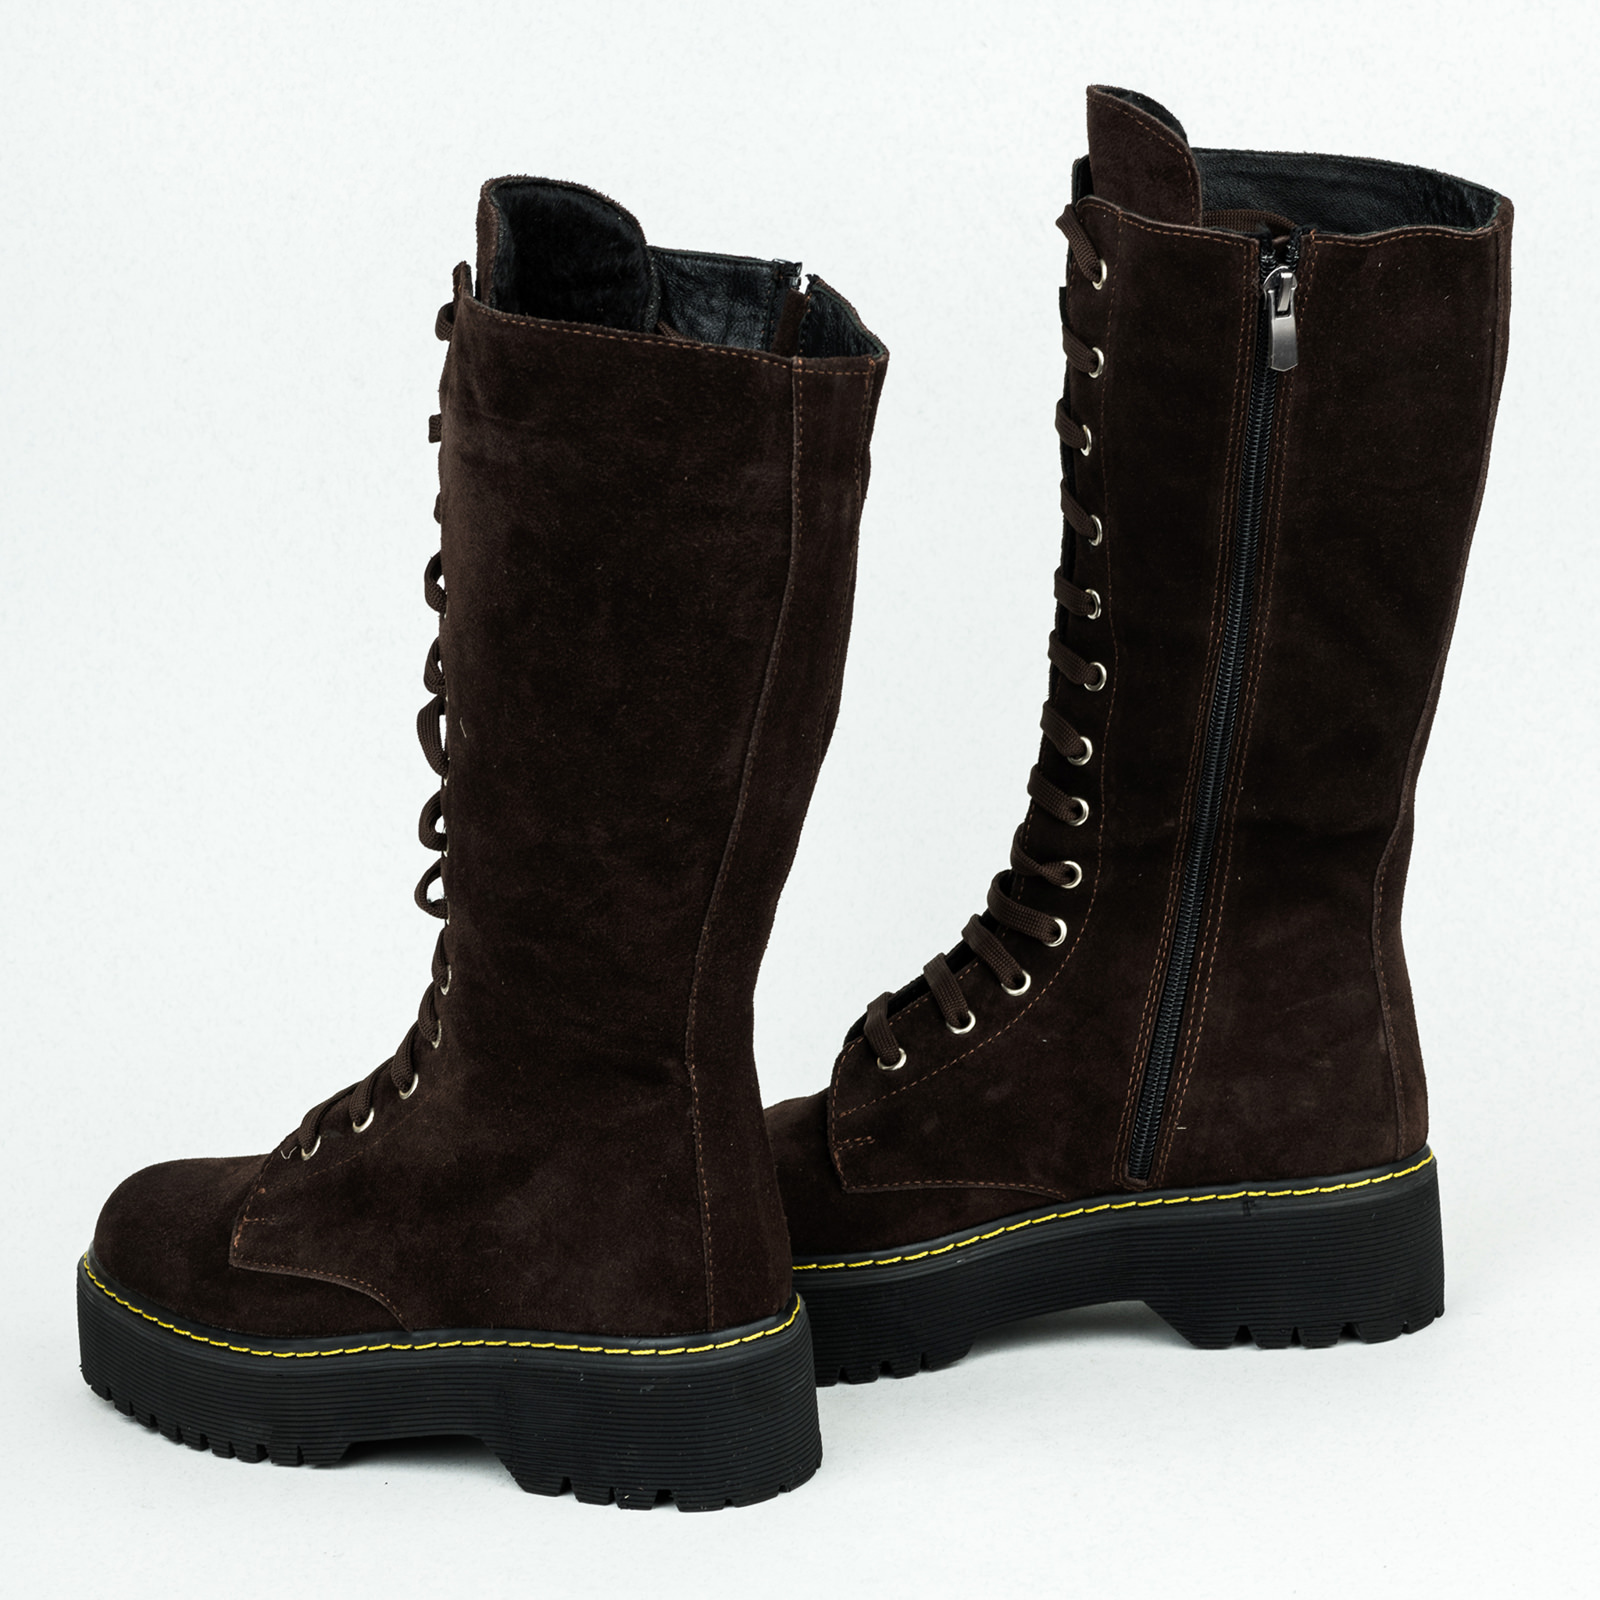 Leather WATERPROOF boots B204 - BROWN